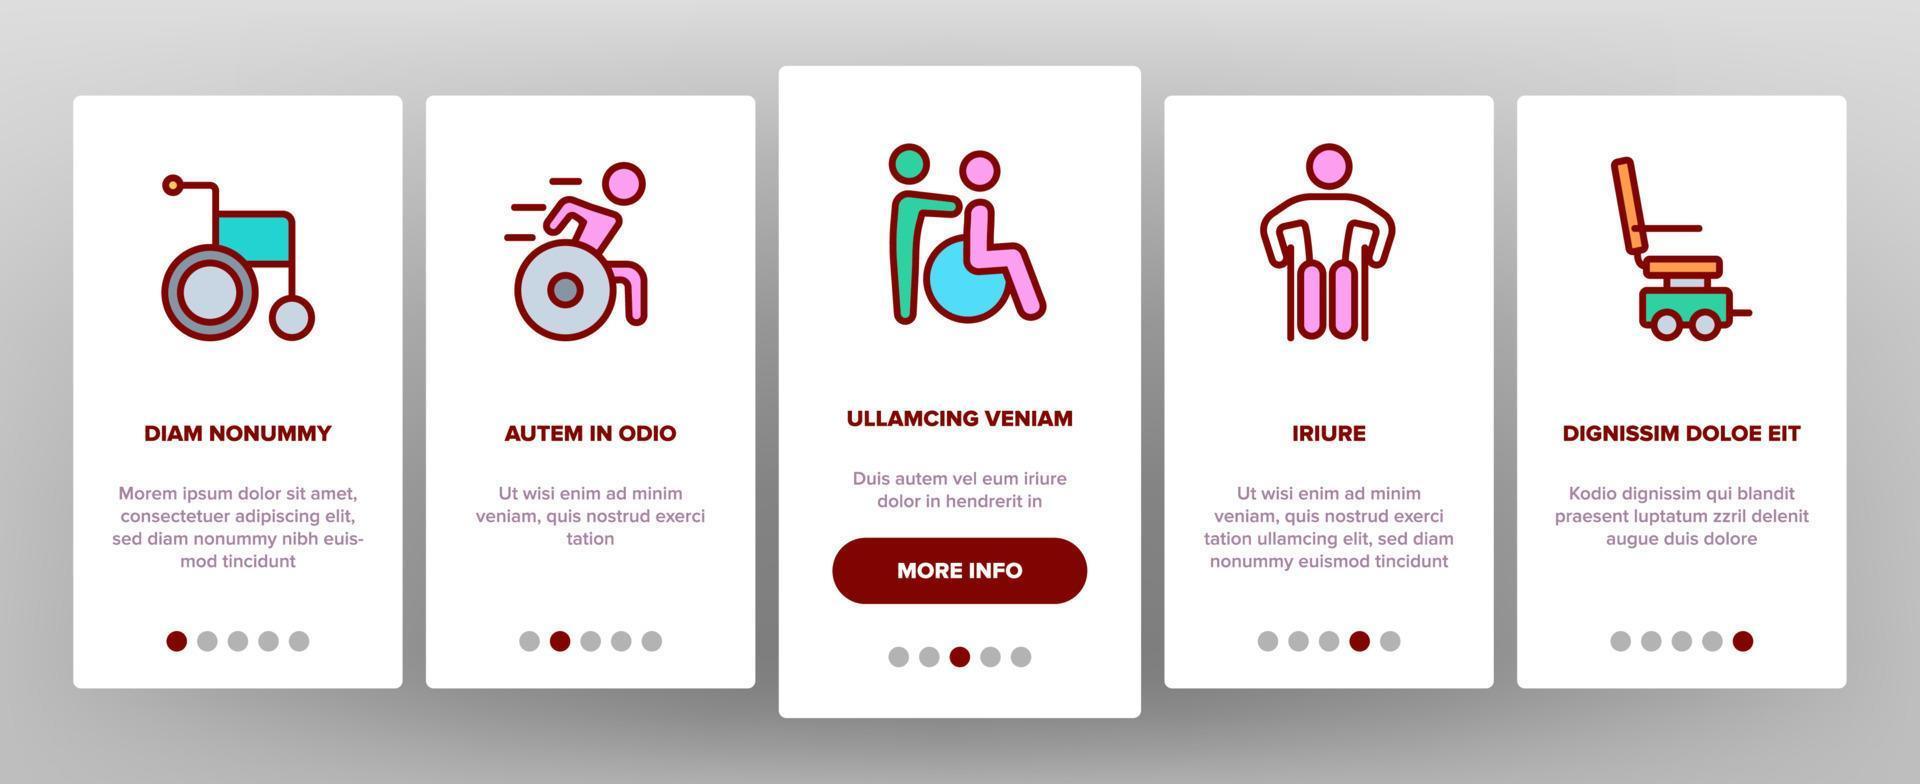 Wheelchair For Invalid Onboarding Icons Set Vector